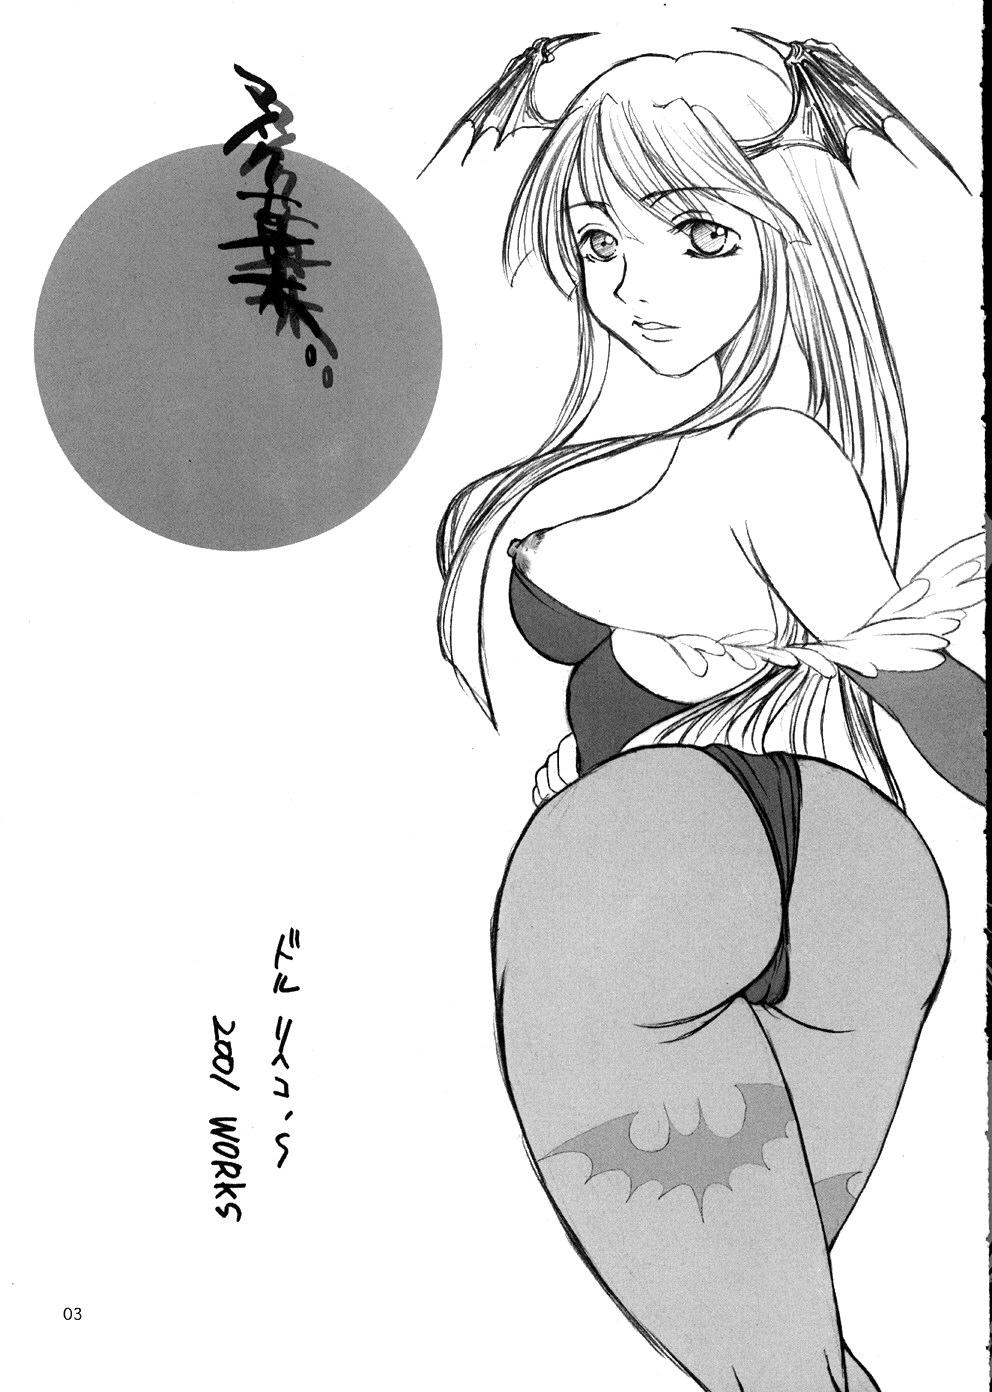 Femboy Maiku Maki - King of fighters Final fight Free Amateur Porn - Page 2